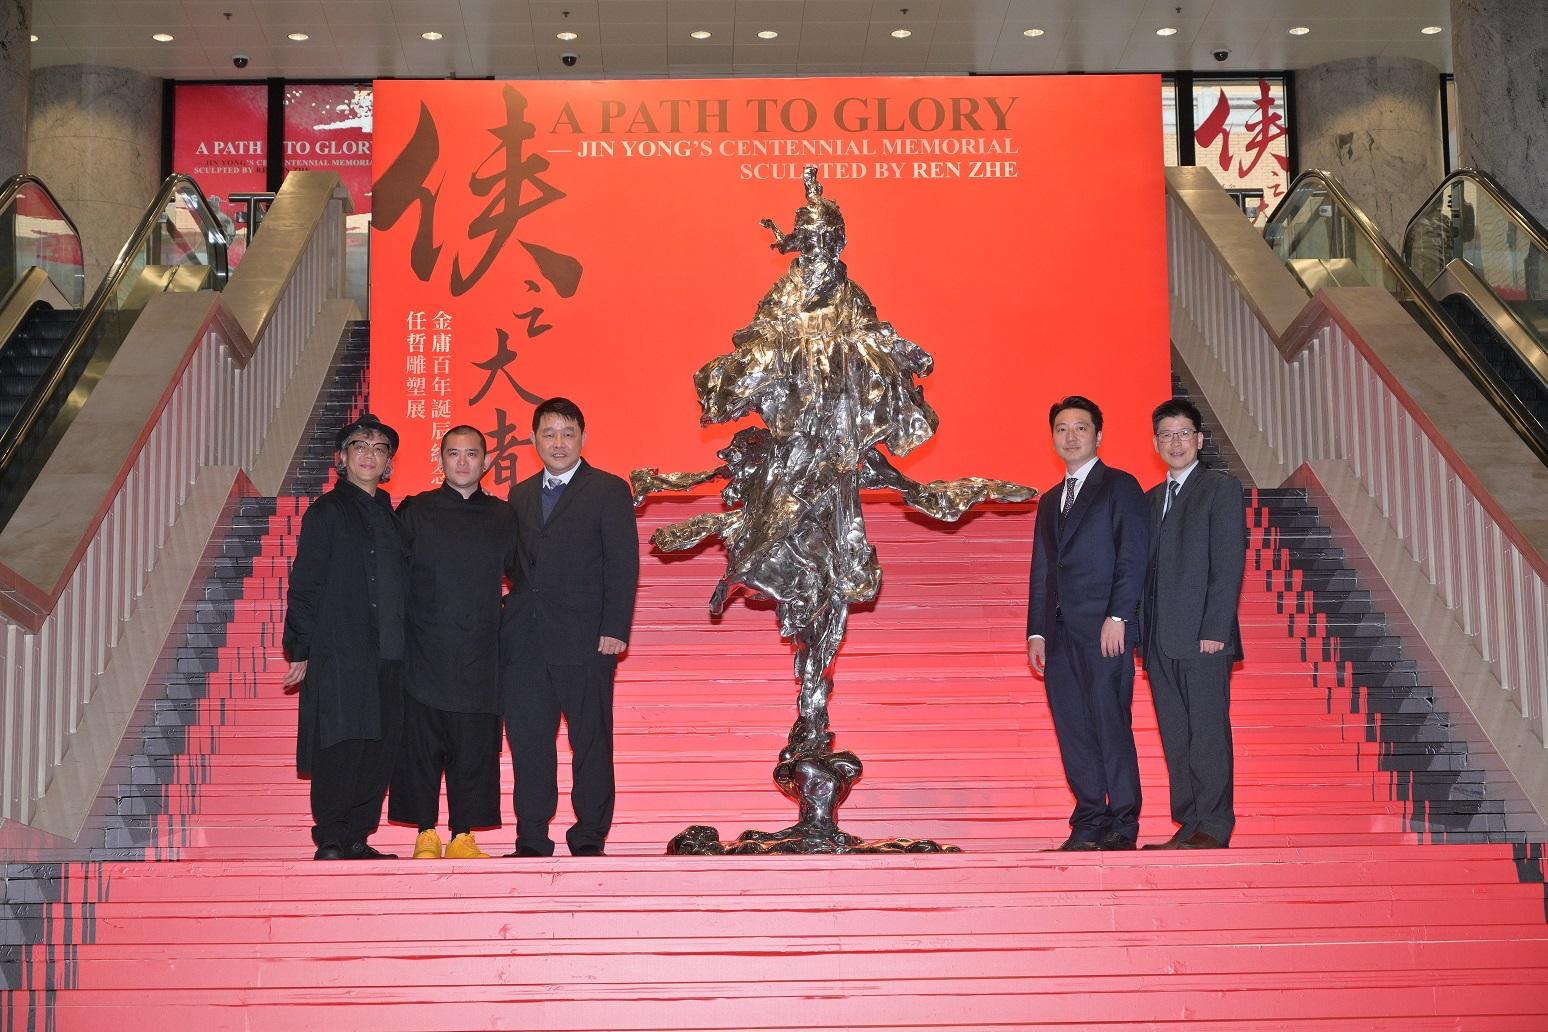 To commemorate the 100th anniversary of the birth of Dr Louis Cha (Jin Yong), the Hong Kong Heritage Museum (HKHM) will present the exhibition "A Path to Glory - Jin Yong's Centennial Memorial, Sculpted by Ren Zhe" from tomorrow (March 16). Picture shows (from left) artist Victor Wong; sculptor Ren Zhe; the Museum Director of the HKHM, Mr Brian Lam; the Founder of Guyu Cultural Development Foundation, Mr William Fong; and the Curator (Art) of the HKHM, Dr Raymond Tang next to the sculpture "Feng Qingyang".